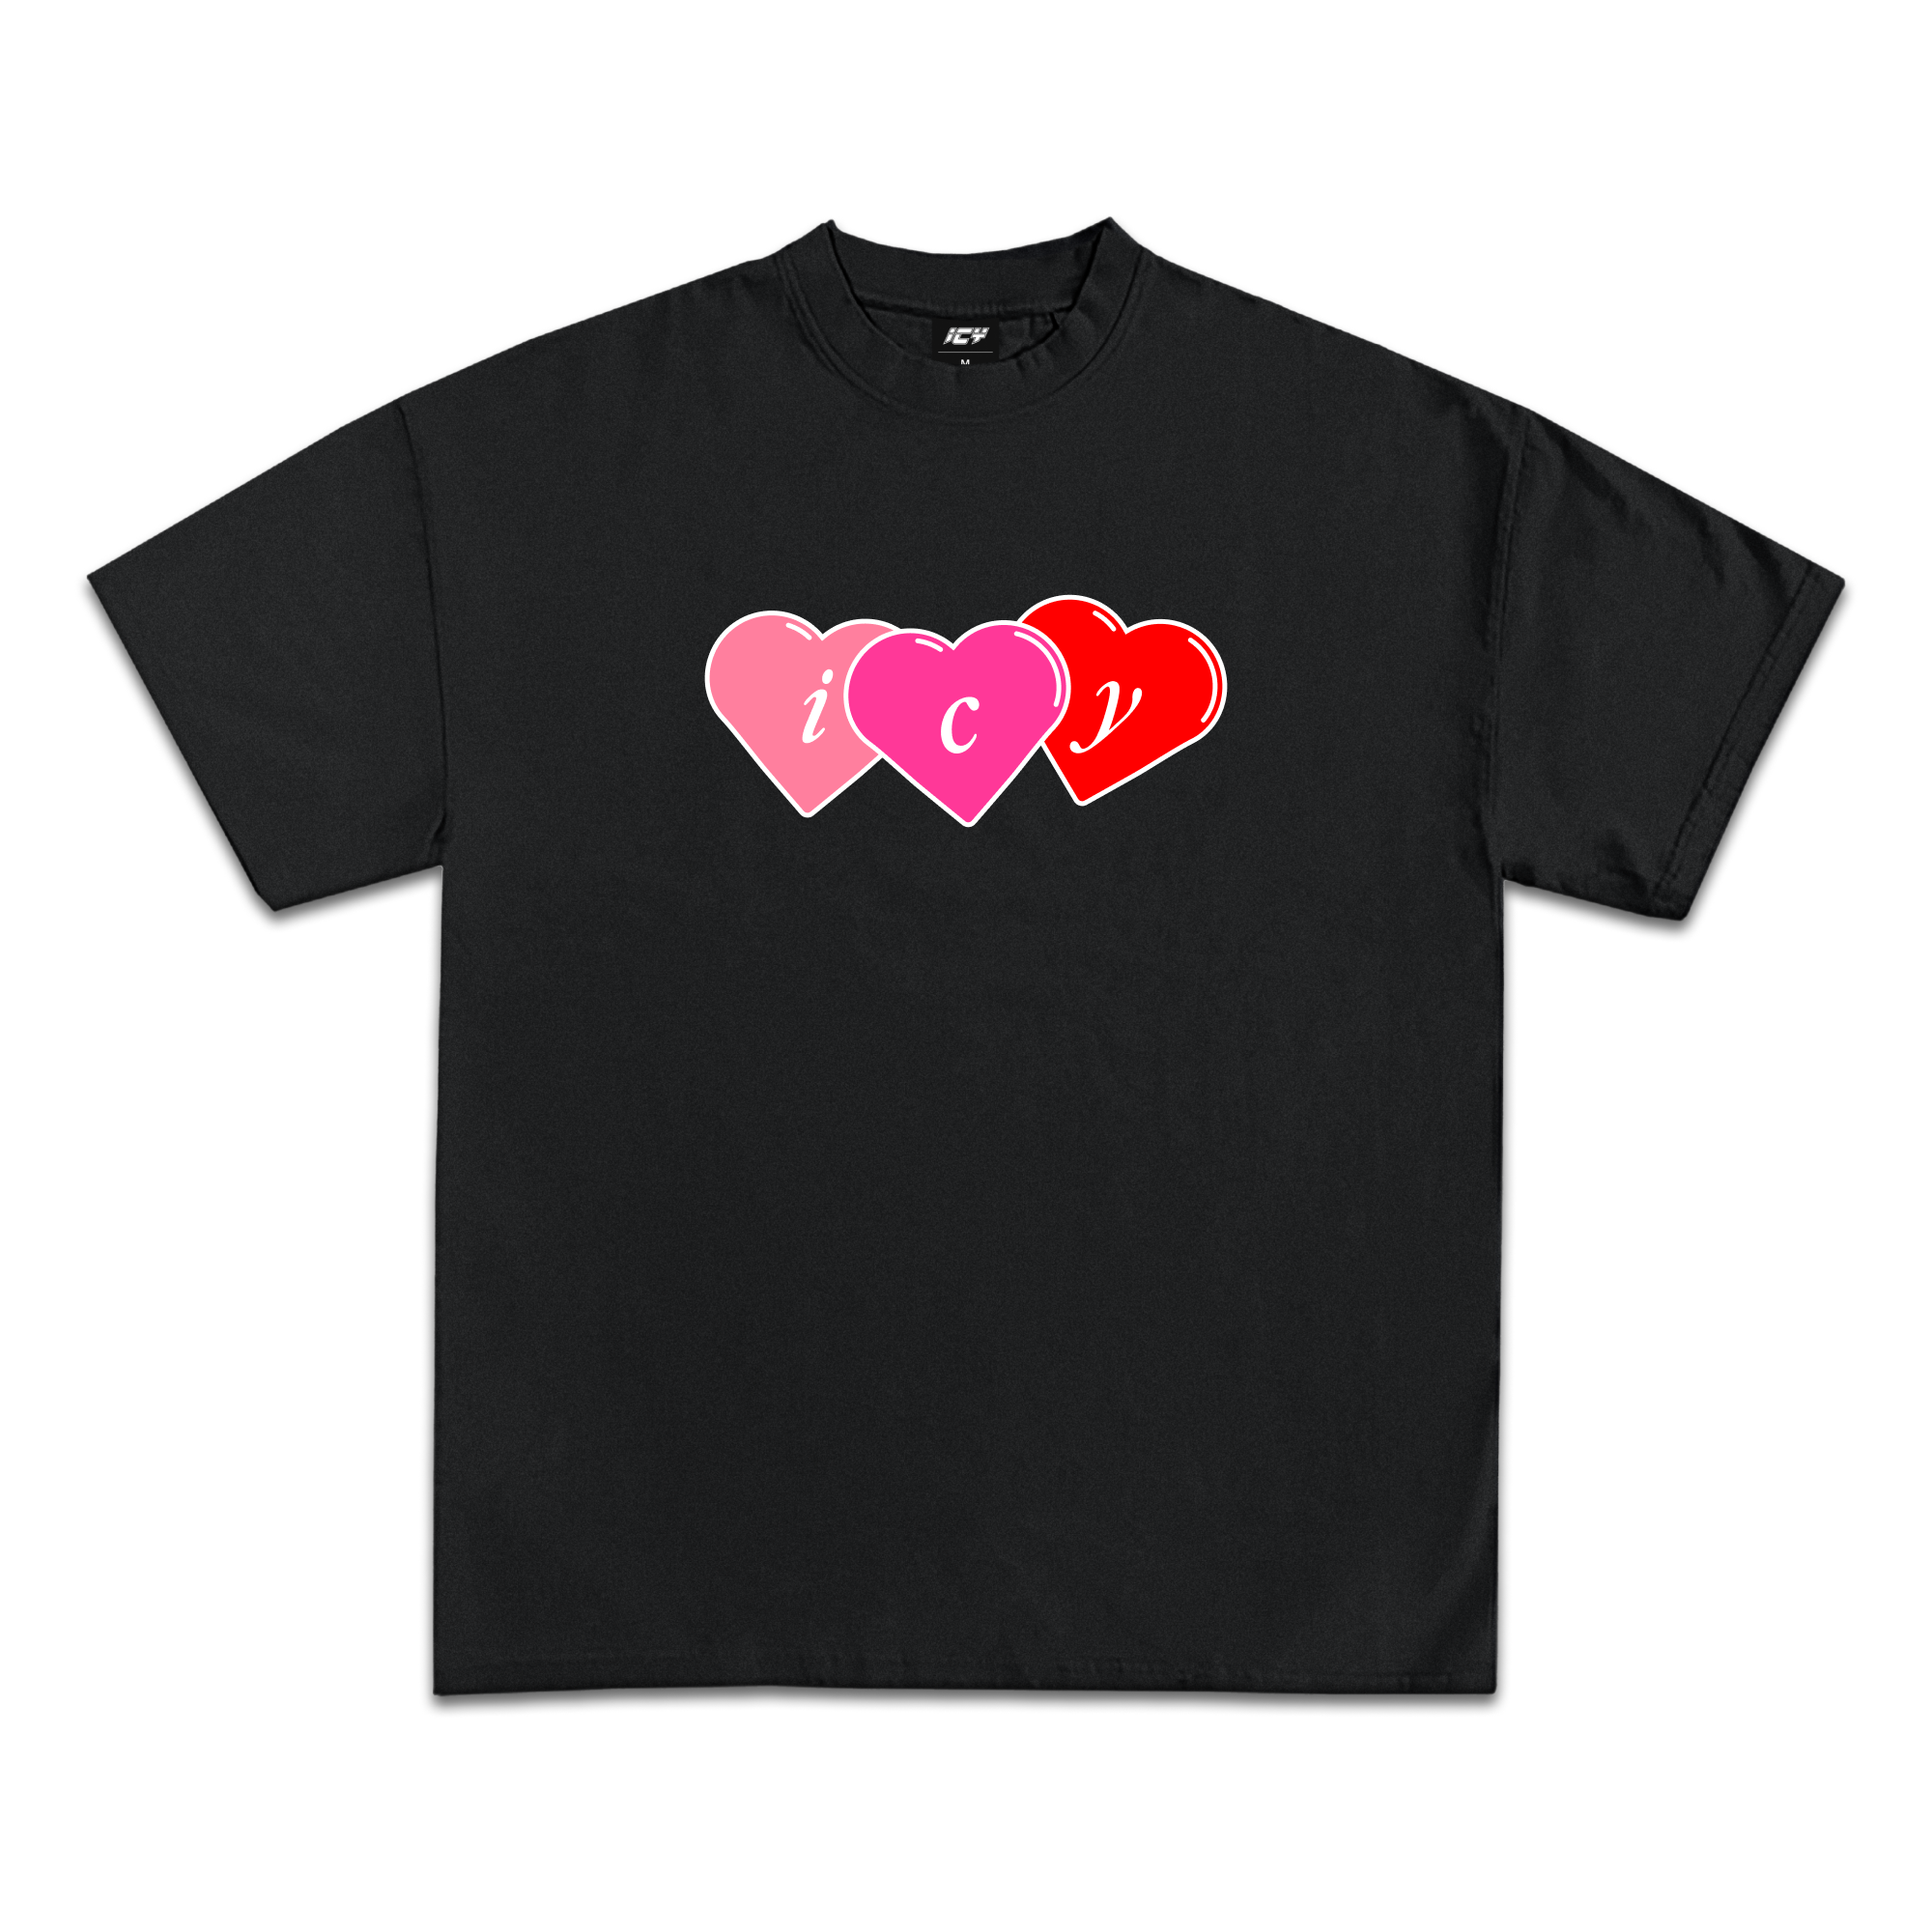 Icy Hearts Graphic T-Shirt